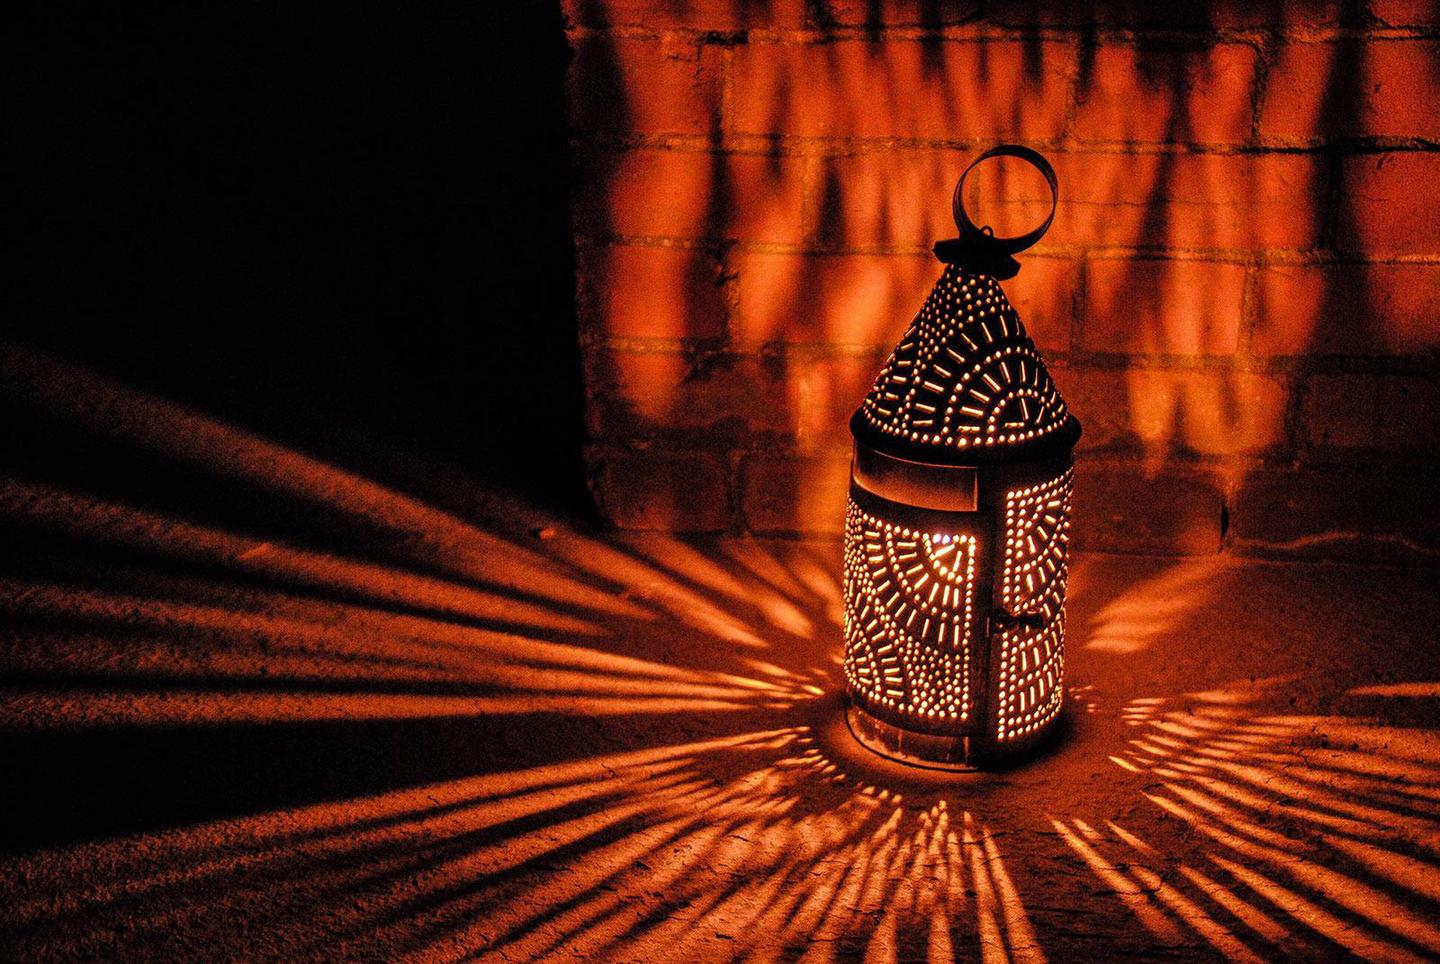 An illuminated lantern sits on the fort floorAn illuminated lantern sits on the fort floor. The metal lantern has many details which cast lace like imagery of light on the brick walls and granite floor.